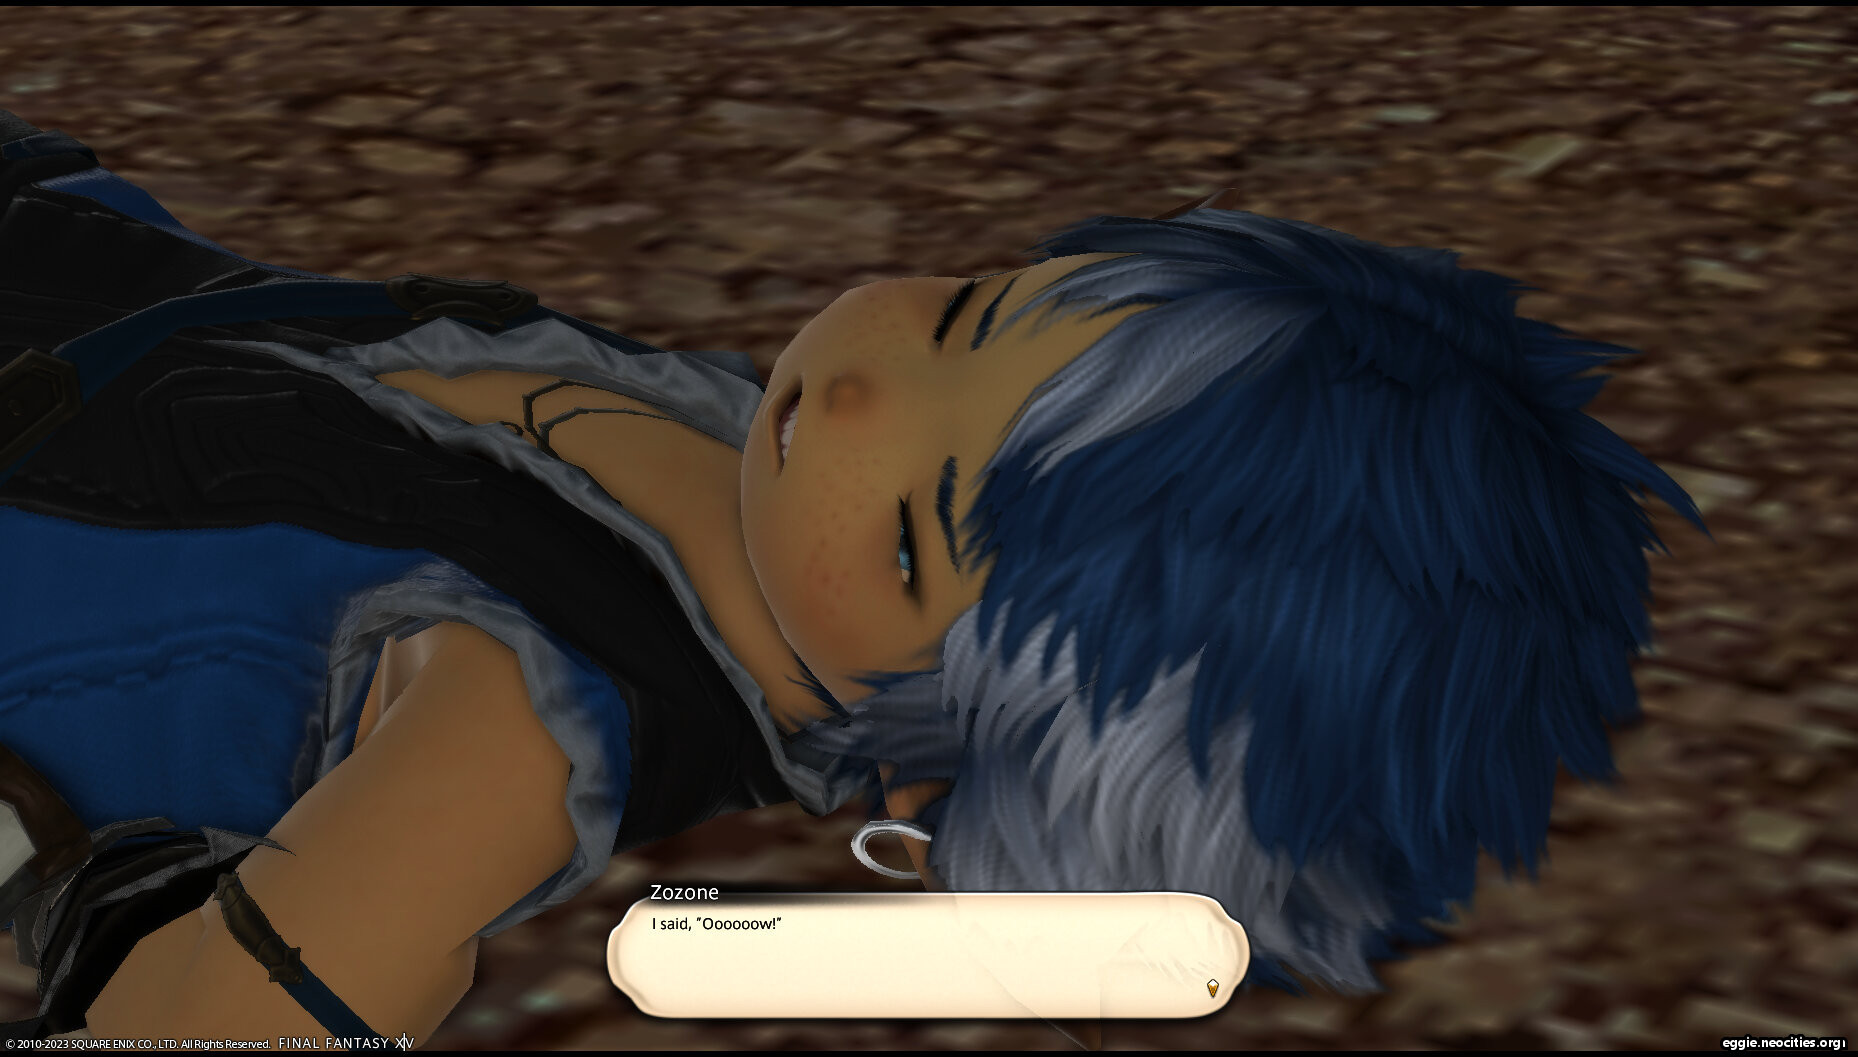 A blue and white haired lalafell is lying on the ground, his face in a grimace. He has a dialogue box that shows his name as Zozone. He says: I said Oooooow.